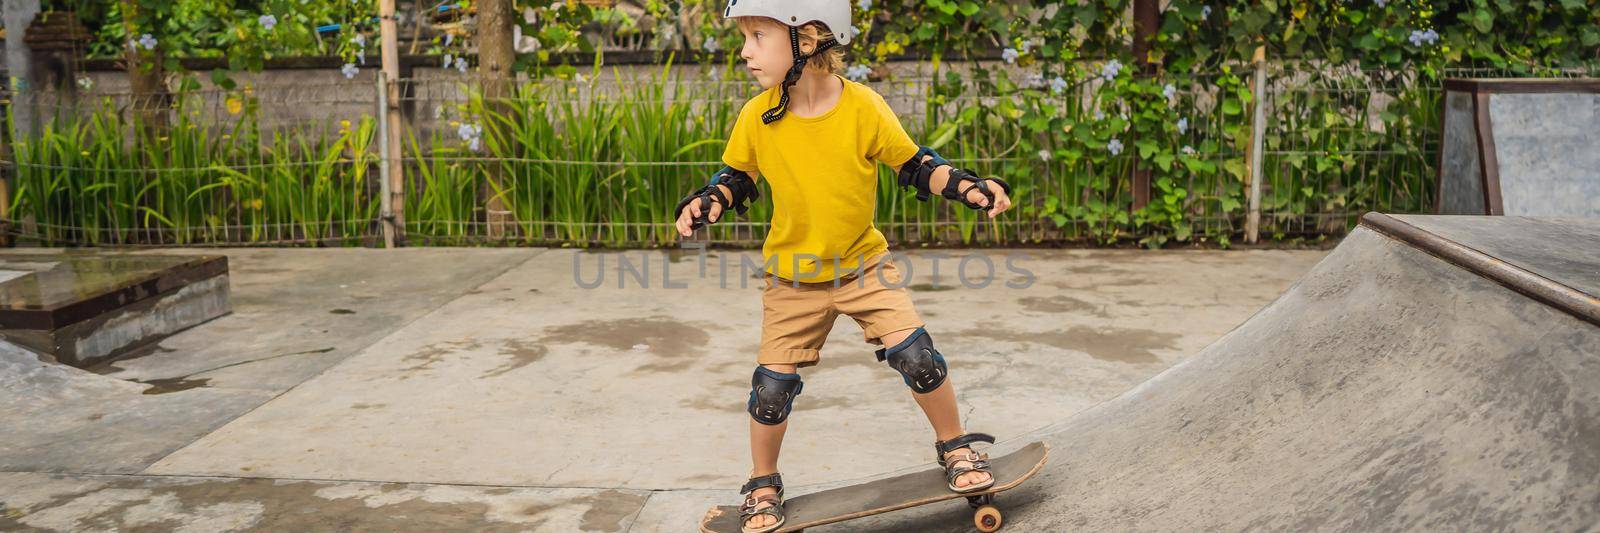 Athletic boy in helmet and knee pads learns to skateboard with in a skate park. Children education, sports BANNER, LONG FORMAT by galitskaya